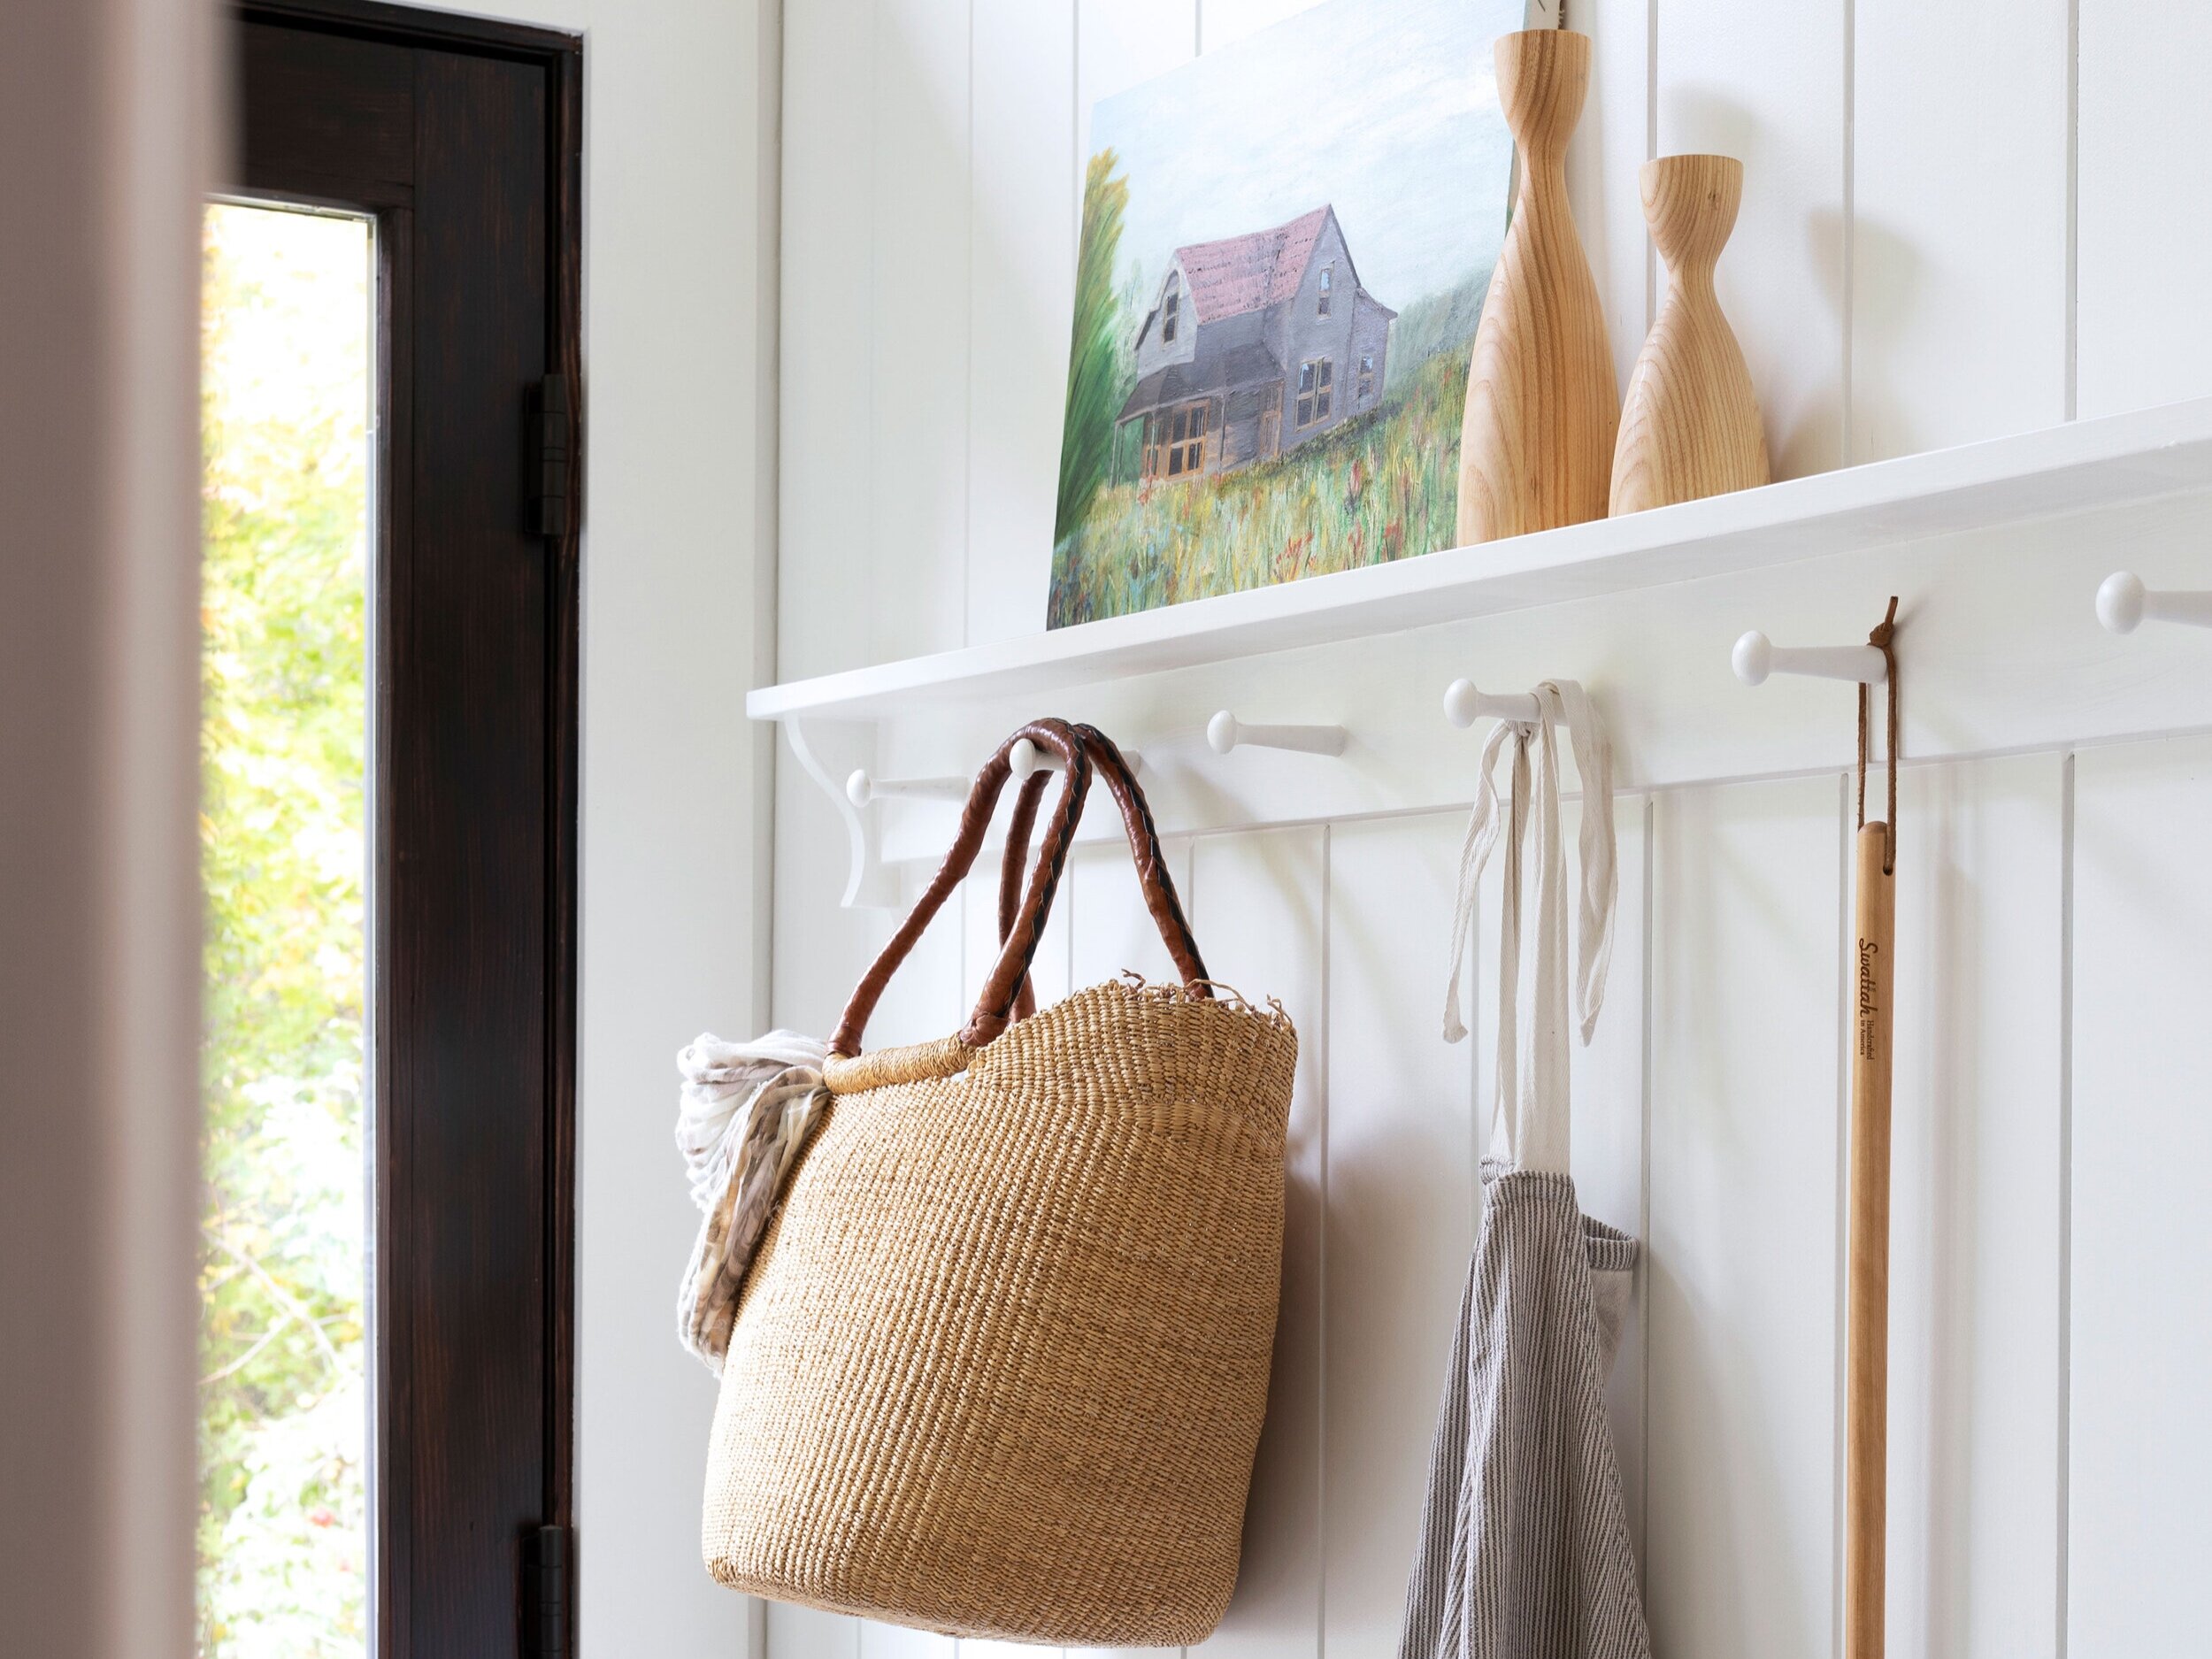 Our Farmhouse Mudroom Reveal — The Grit and Polish